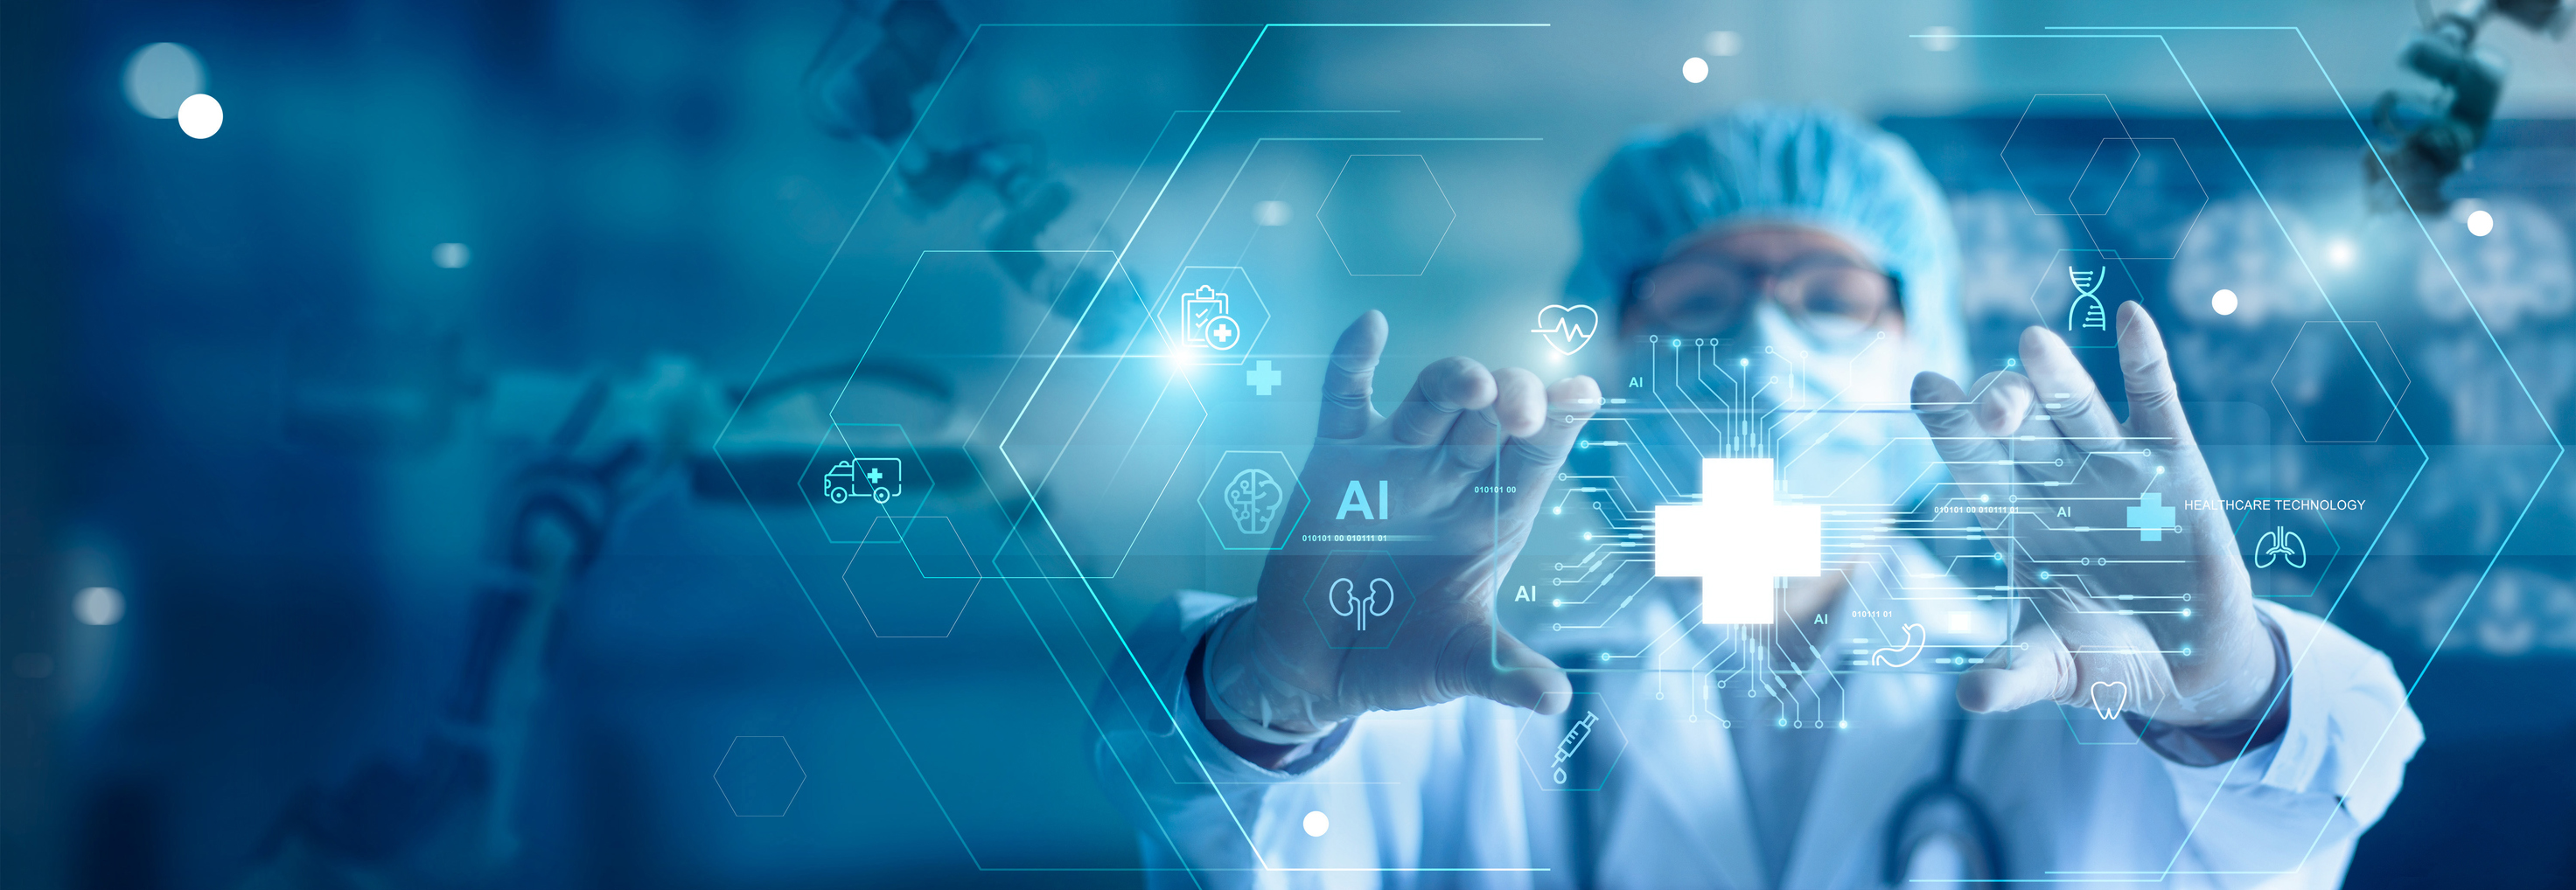 Medical technology, doctor use AI robots for diagnosis, care, and increasing accuracy patient treatment in future. Medical research and development innovation technology to improve patient health. (Getty Images/iStockphoto)